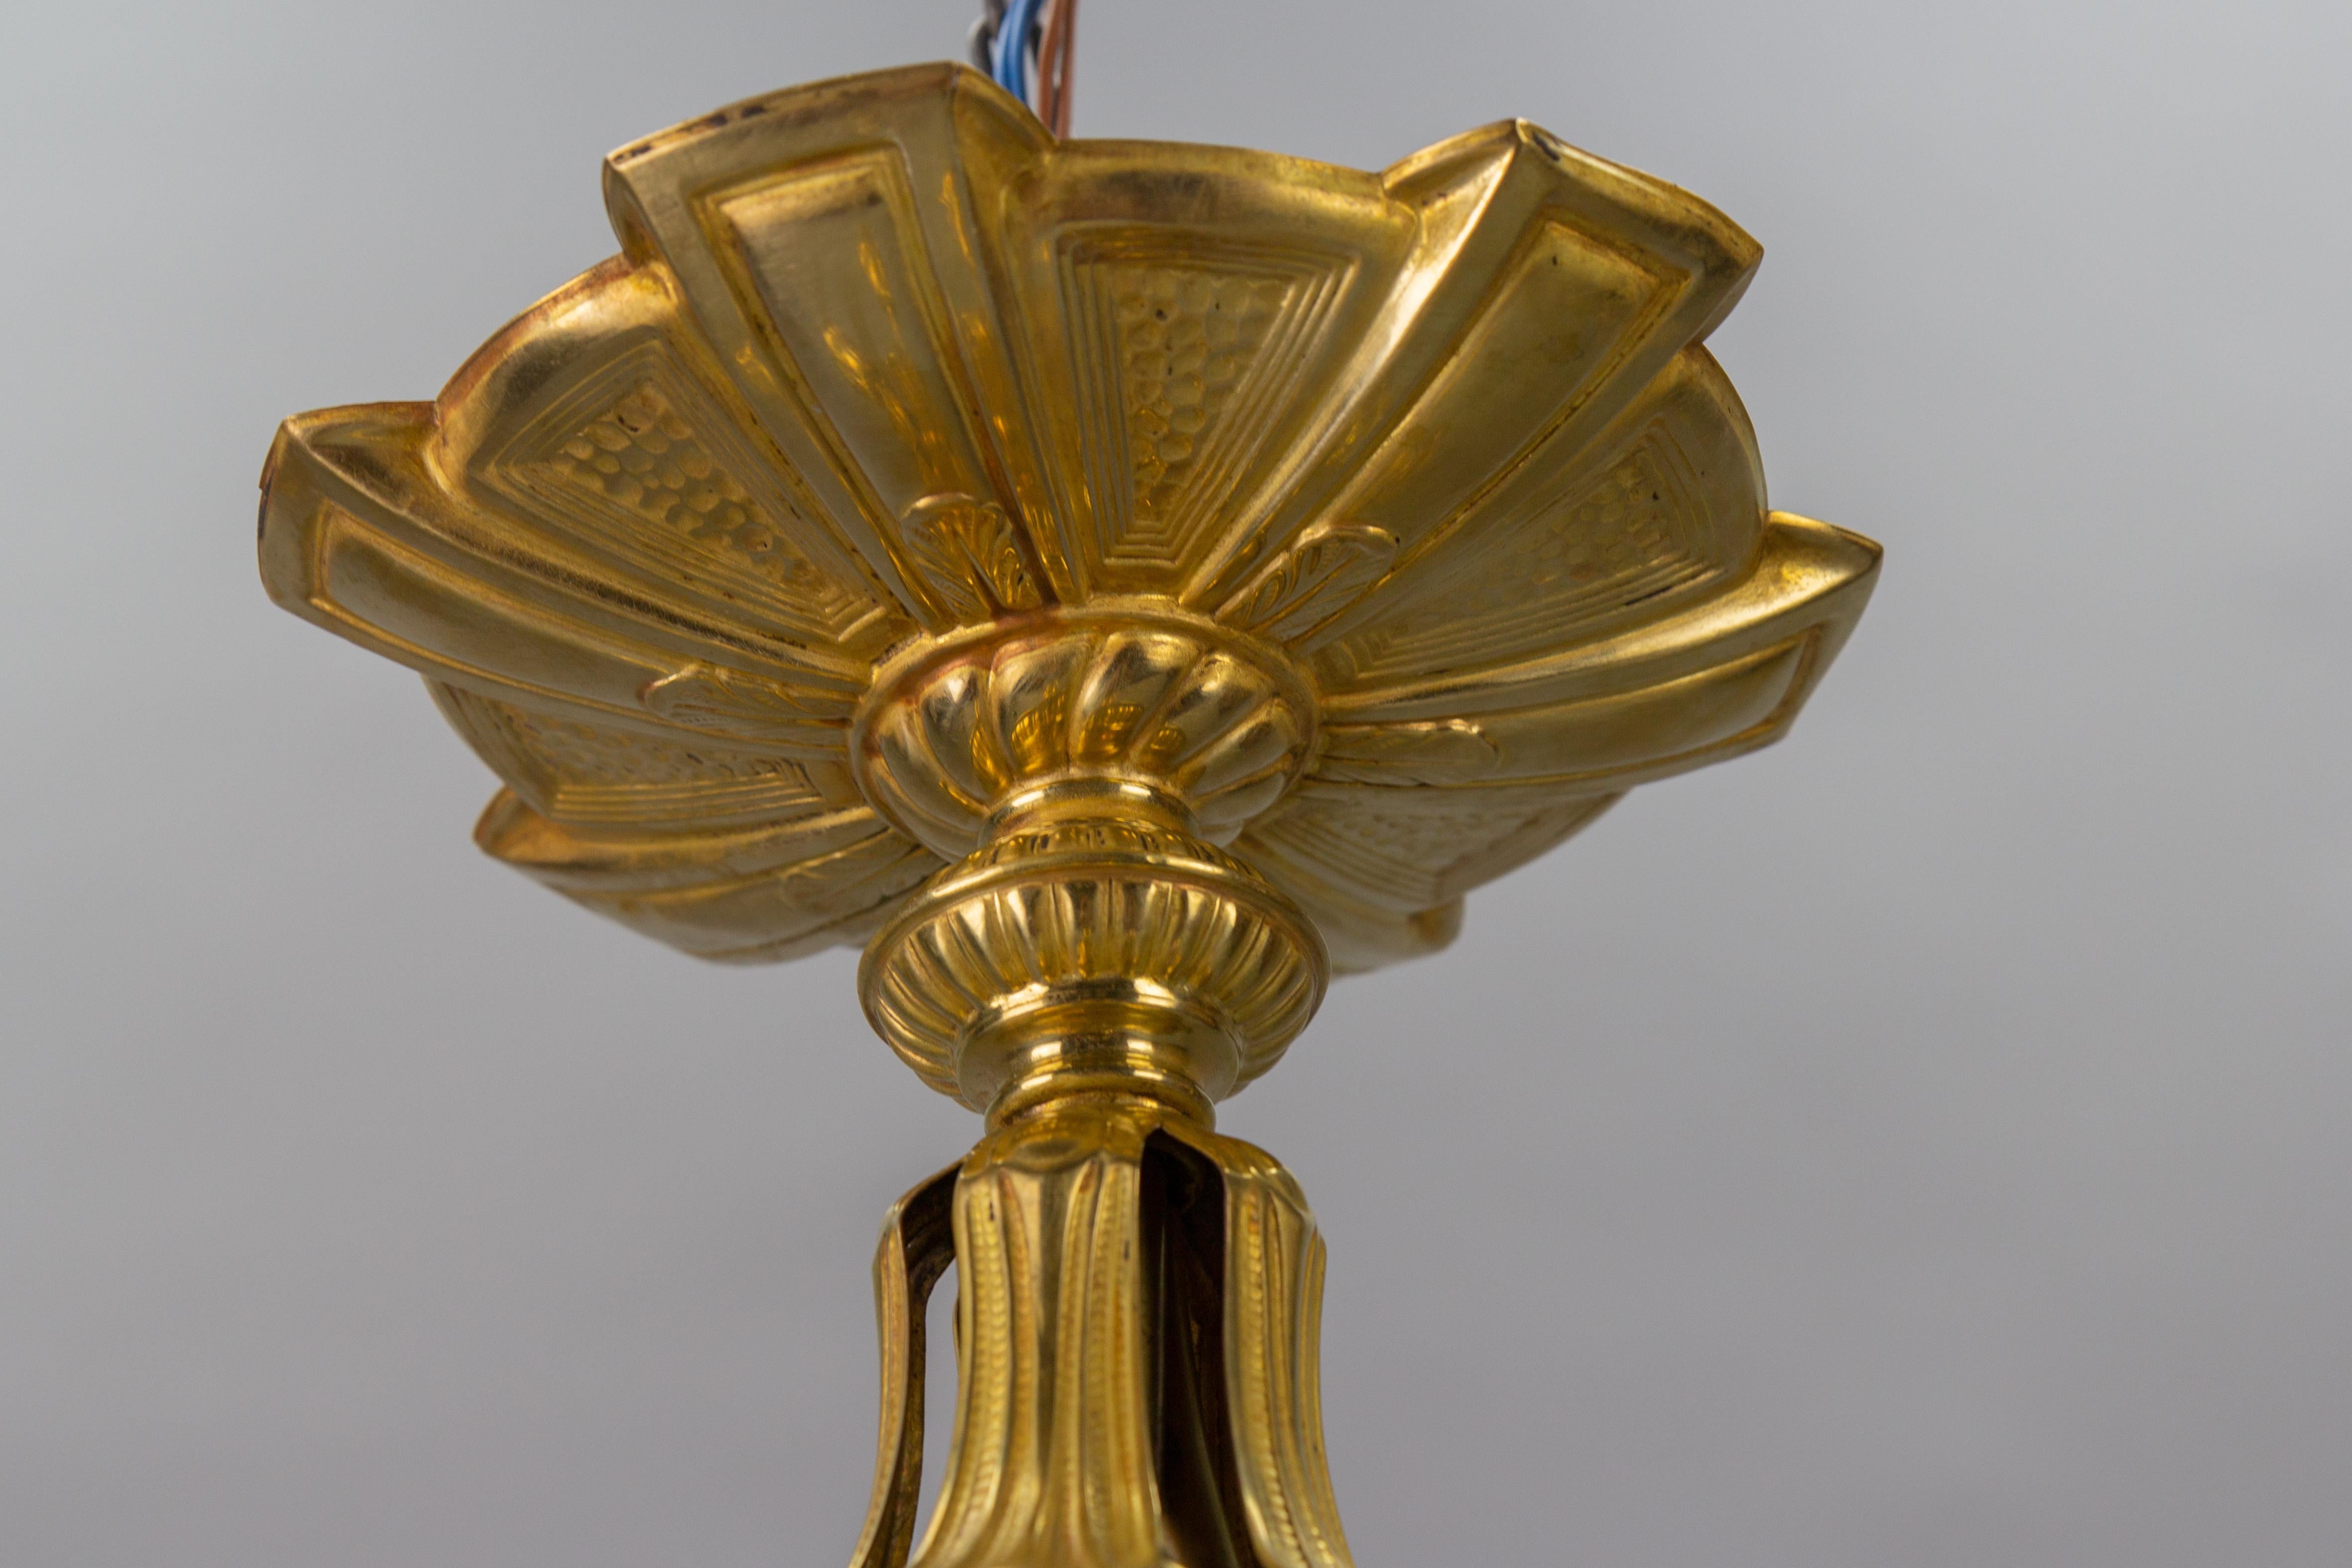  French Art Deco Three-Light Brass Ceiling Light Fixture, 1920s For Sale 7